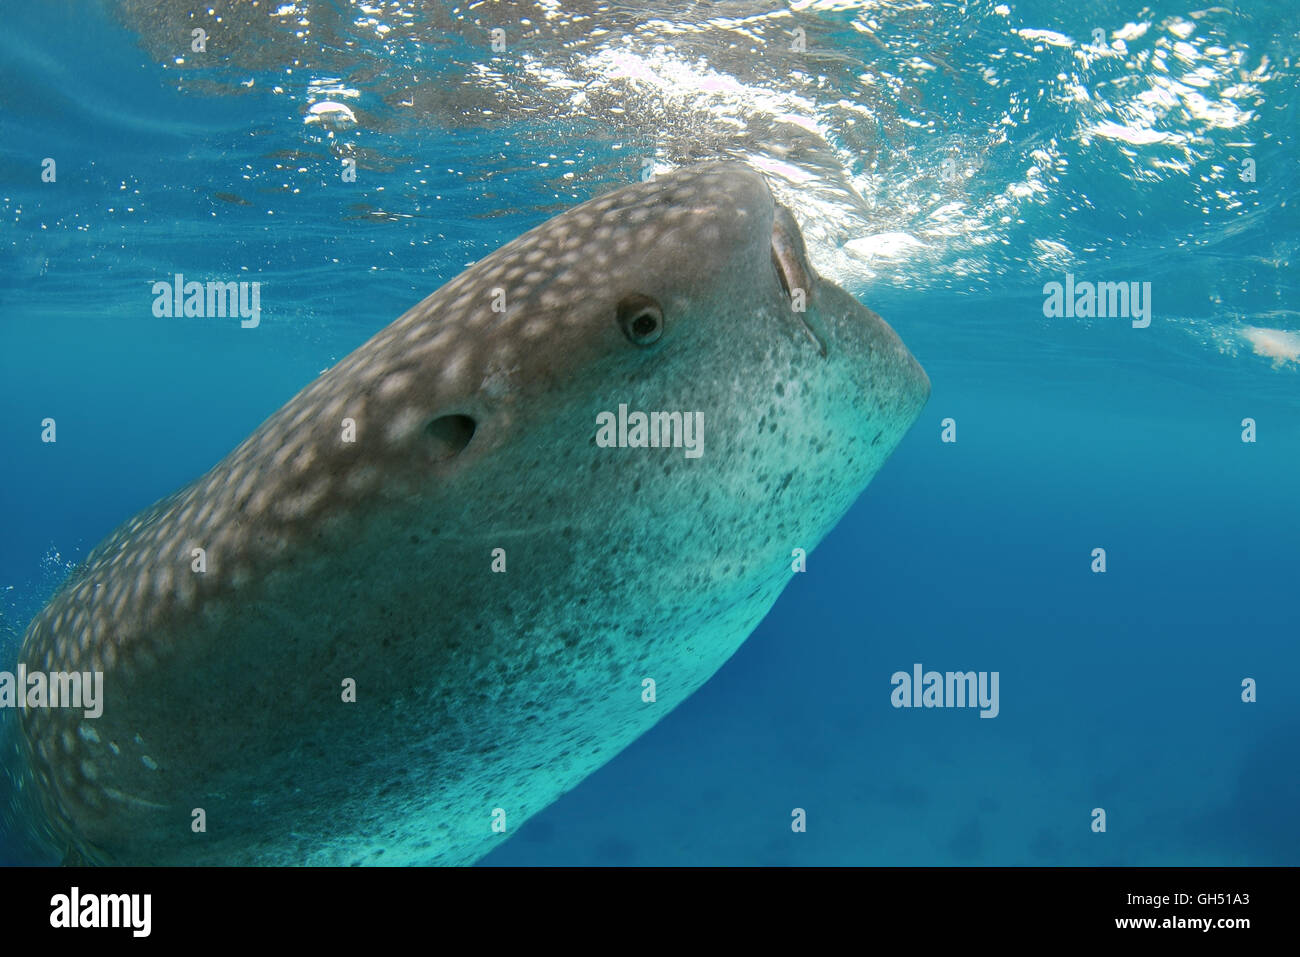 Whale shark or basking shark (Rhincodon typus) eats plankton, Indo-Pacific, Philippines, Southeast Asia Stock Photo